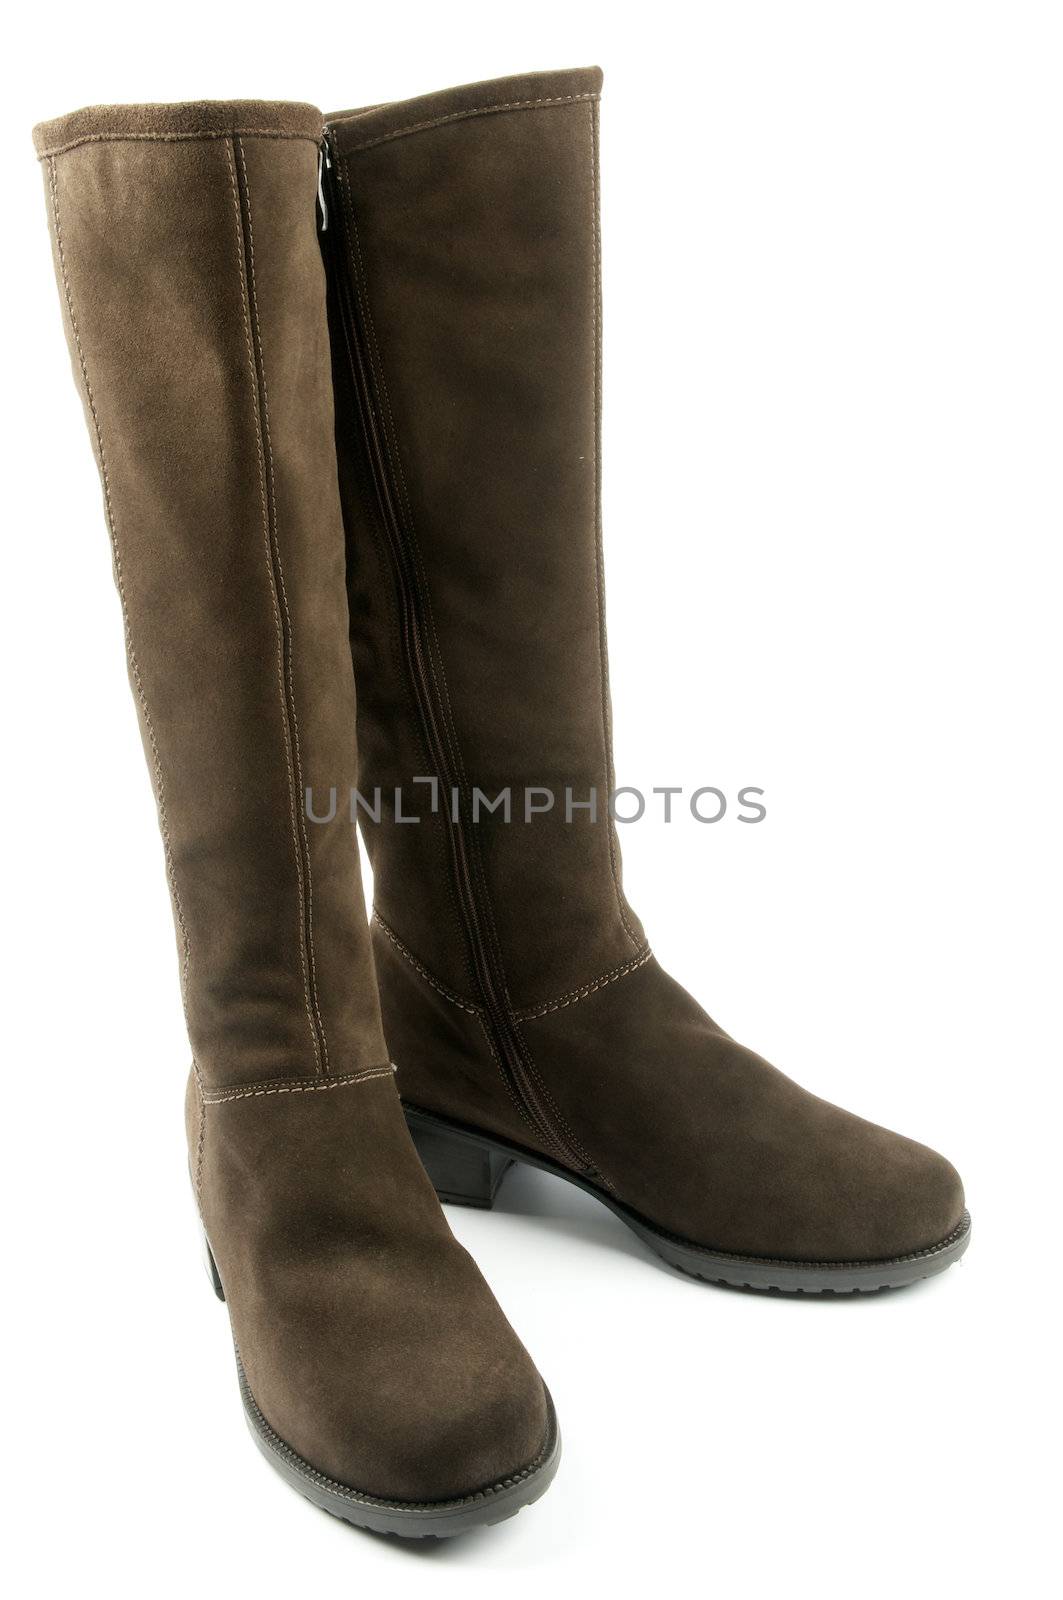 Pair of Brown Chamois Leather Female Boots isolated on white background